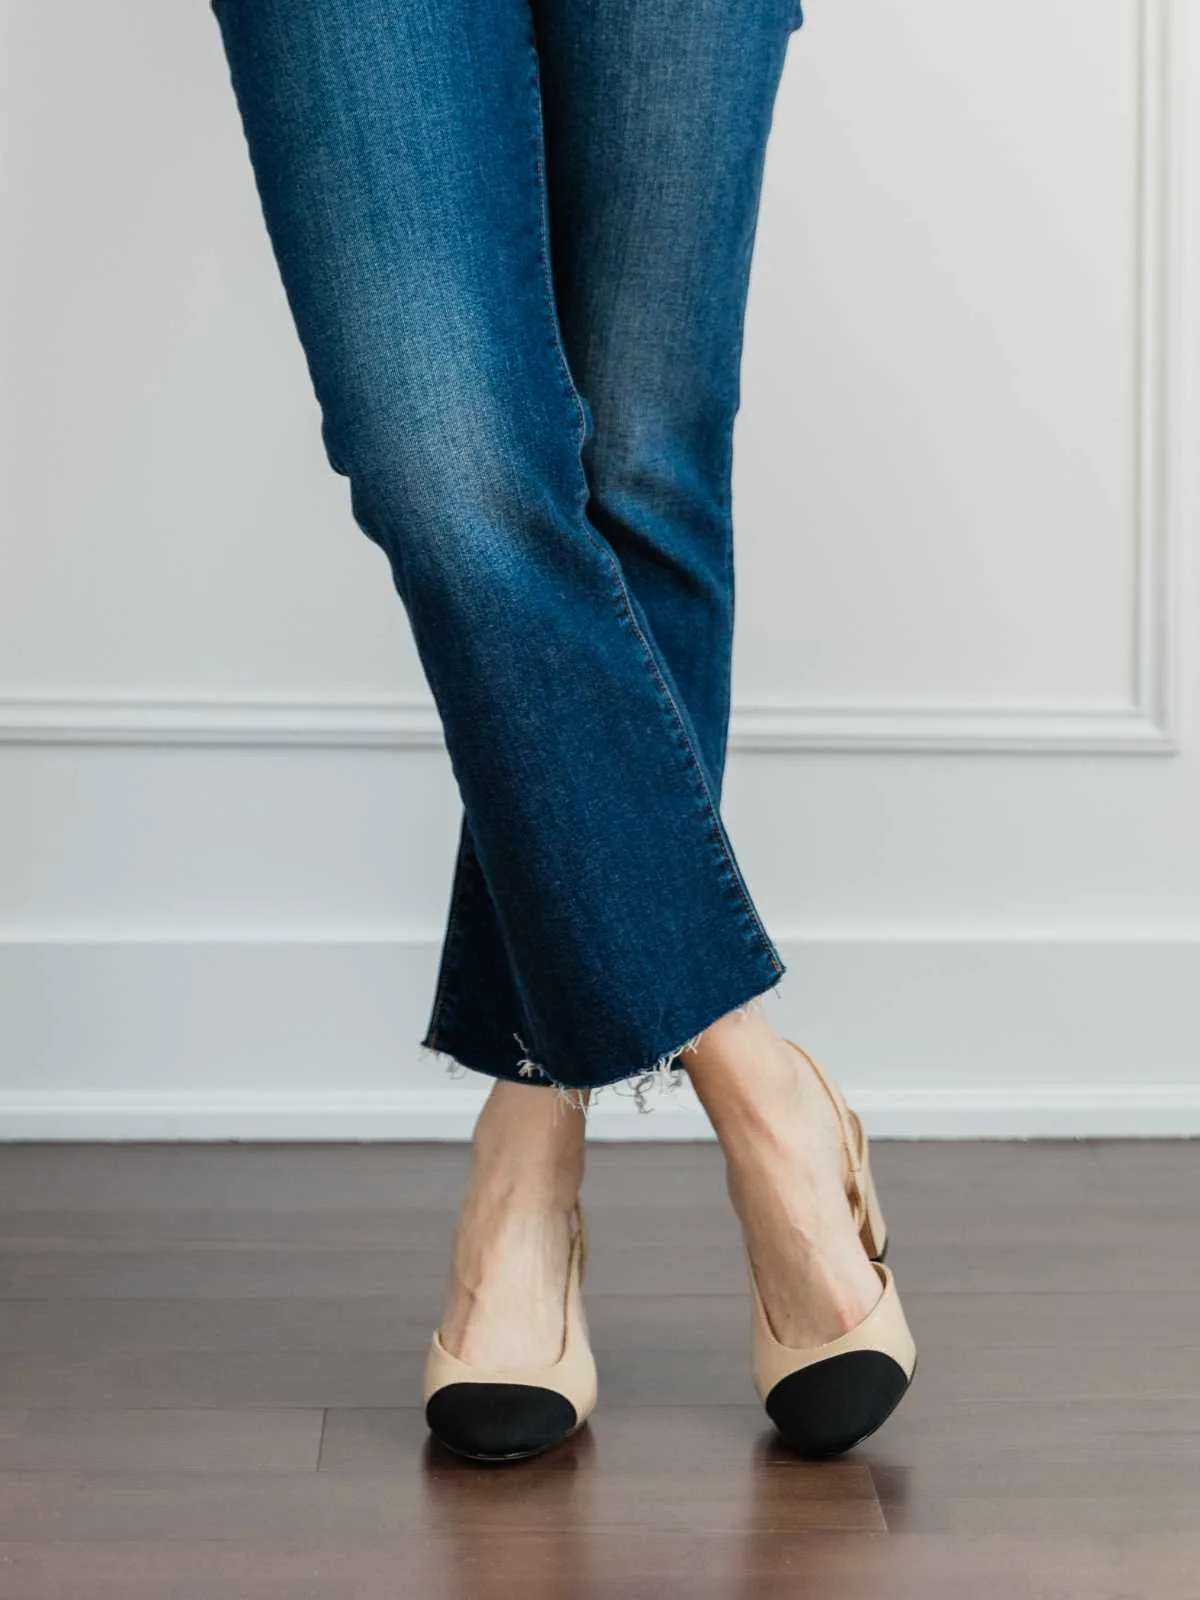 Cropped view of woman's legs wearing slingback pumps with kick flares